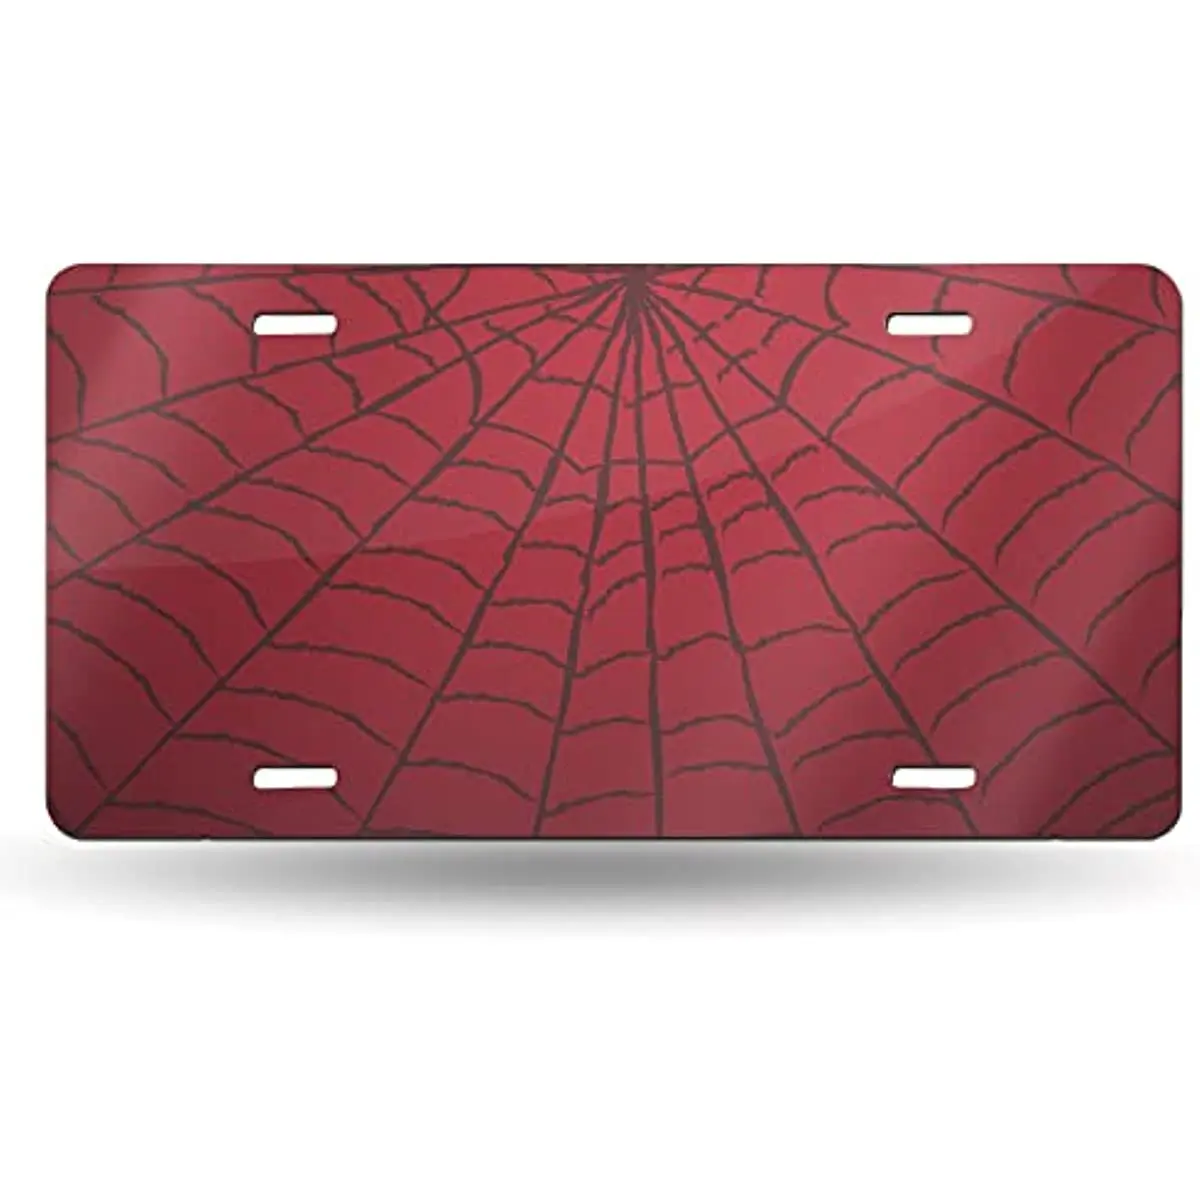 

License Plate,Red Spider Web Decorative Car Front License Plates,Vanity Tag,Metal Car Plate,Aluminum Novelty License Plate